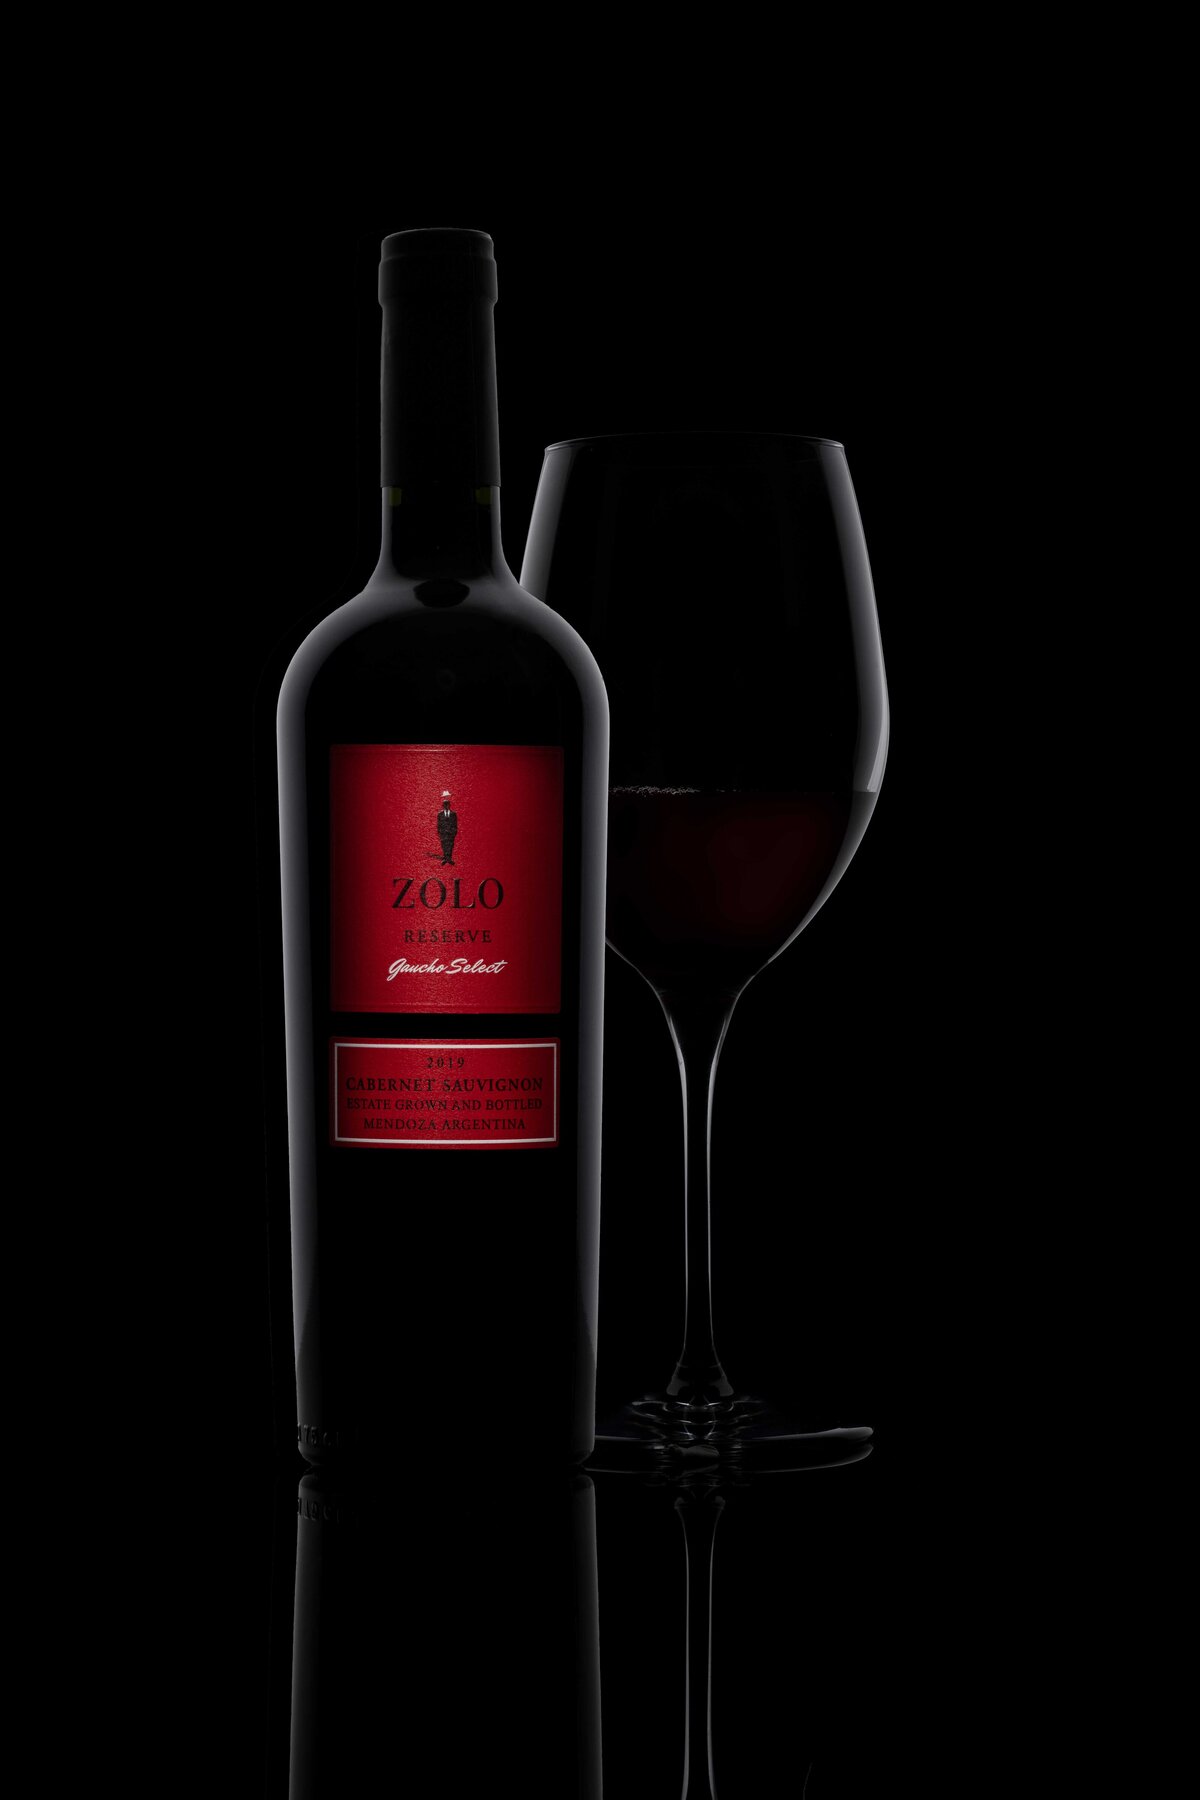 A bottle of Zolo Reserve with artistic lighting against black backdrop